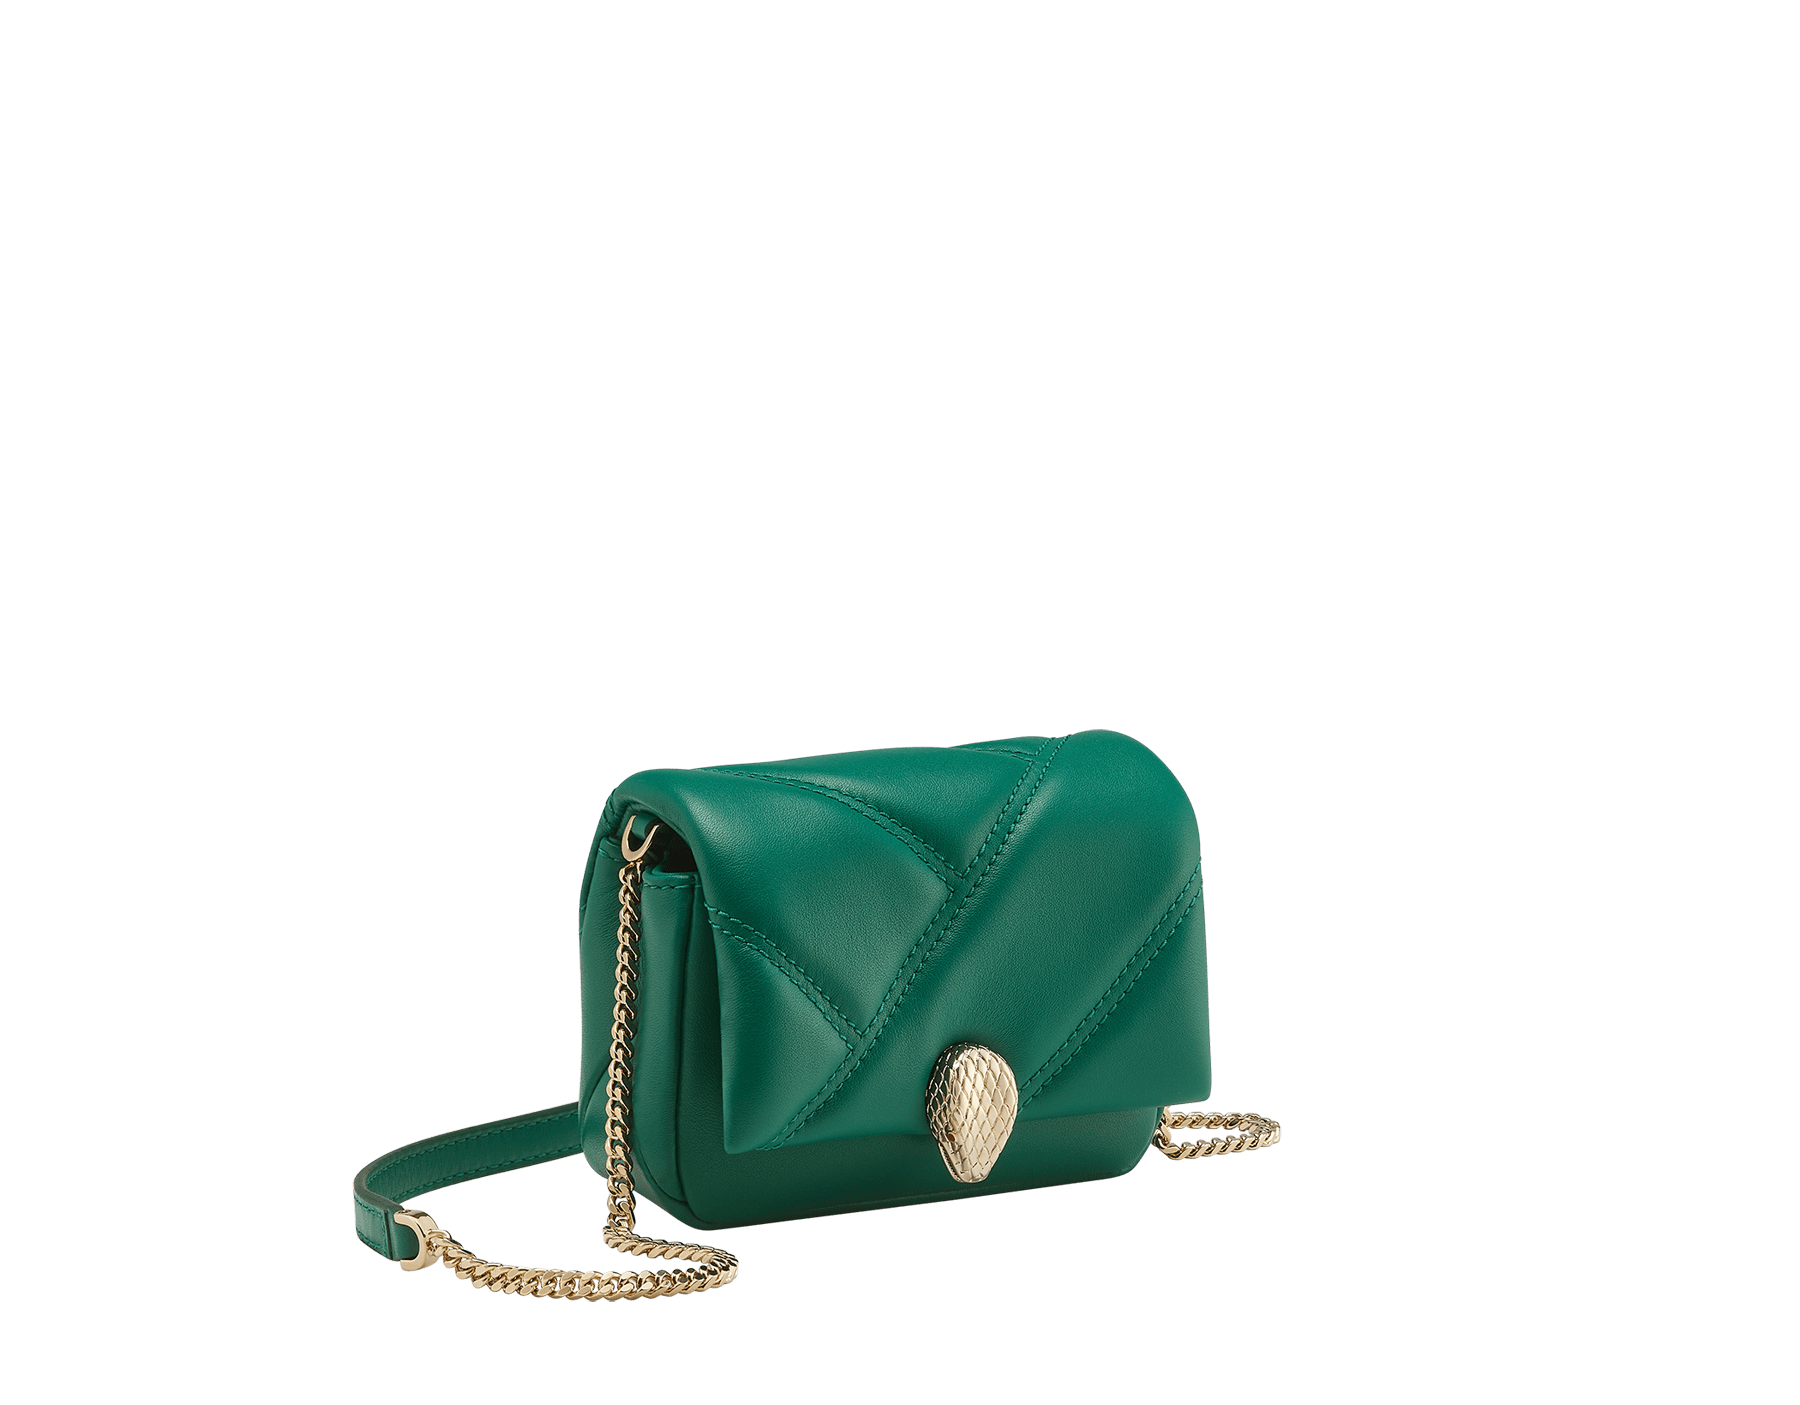 Serpenti Cabochon micro bag in gold calf leather with a maxi matelassé pattern and black nappa leather lining. Captivating snakehead closure in light gold-plated brass embellished with red enamel eyes. SCB-NANOCABOCHONb image 1